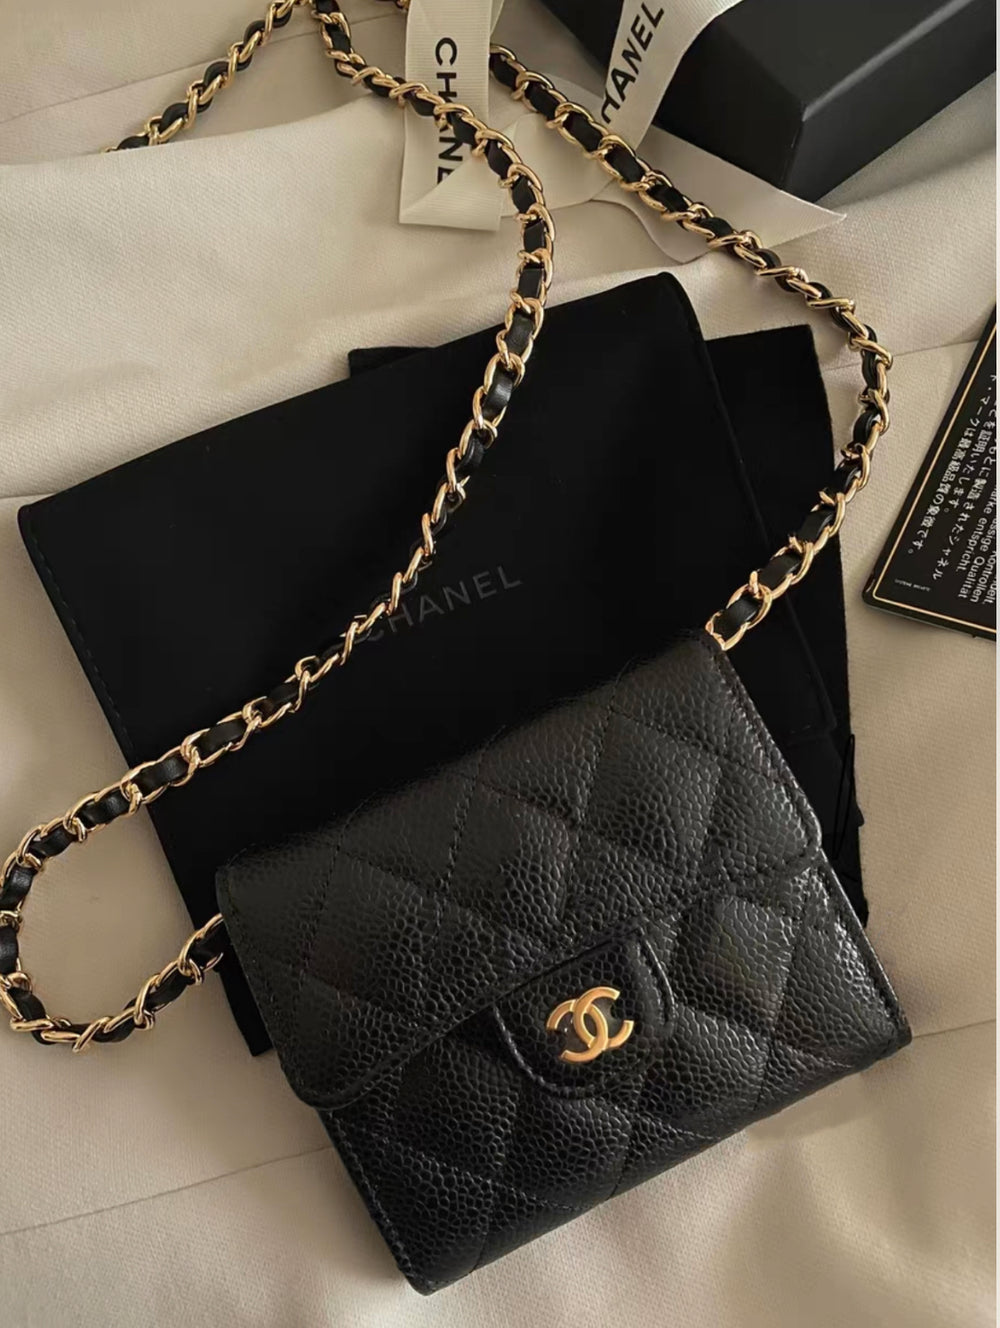 Sophia F. review of Converter Kit for Chanel Small Flap Wallet